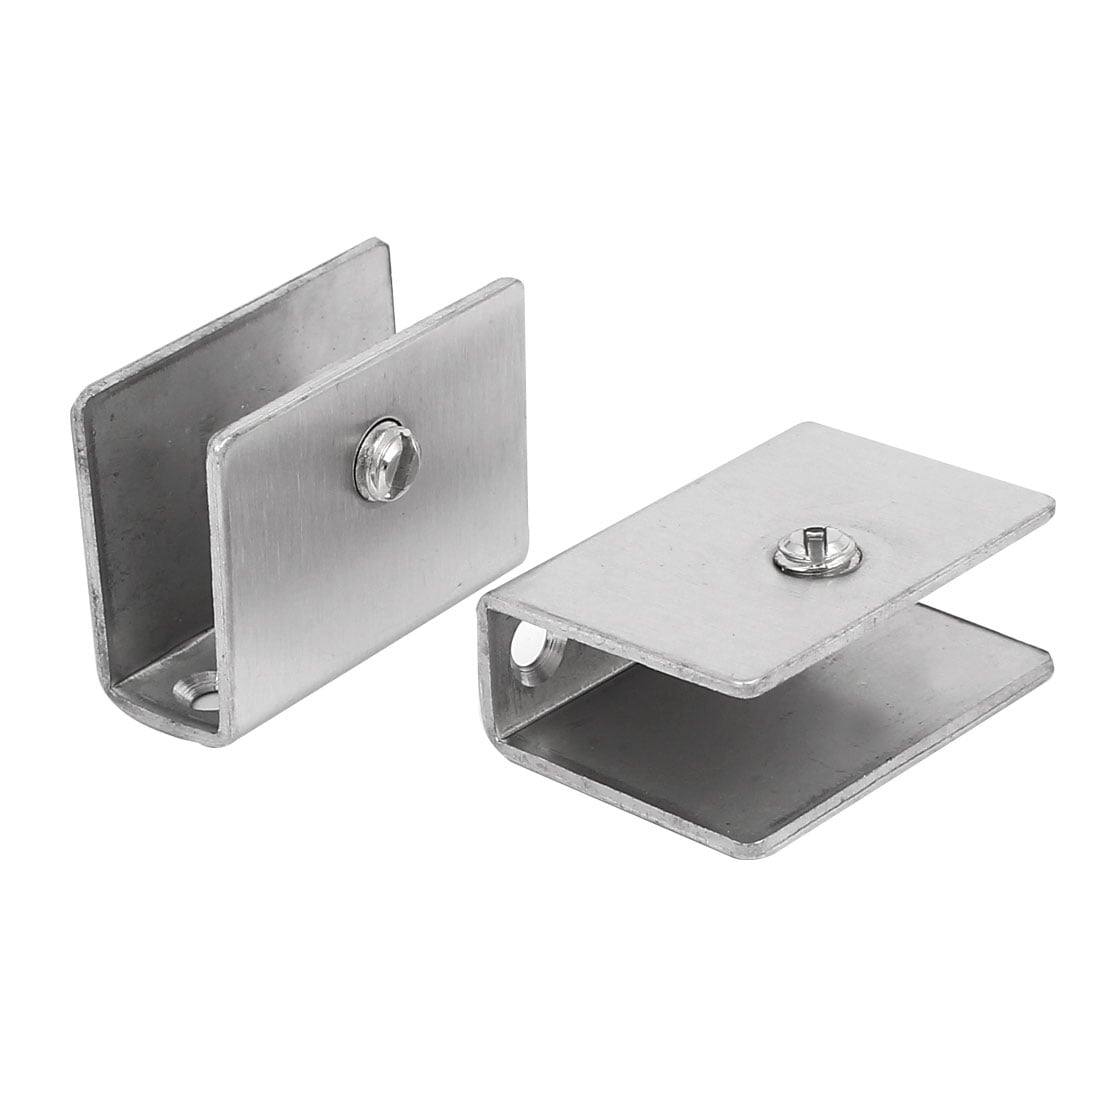 10mm-12mm Thickness Stainless Steel Rectangle Glass Shelf Clamp Clip Holder 4pcs - Silver Tone